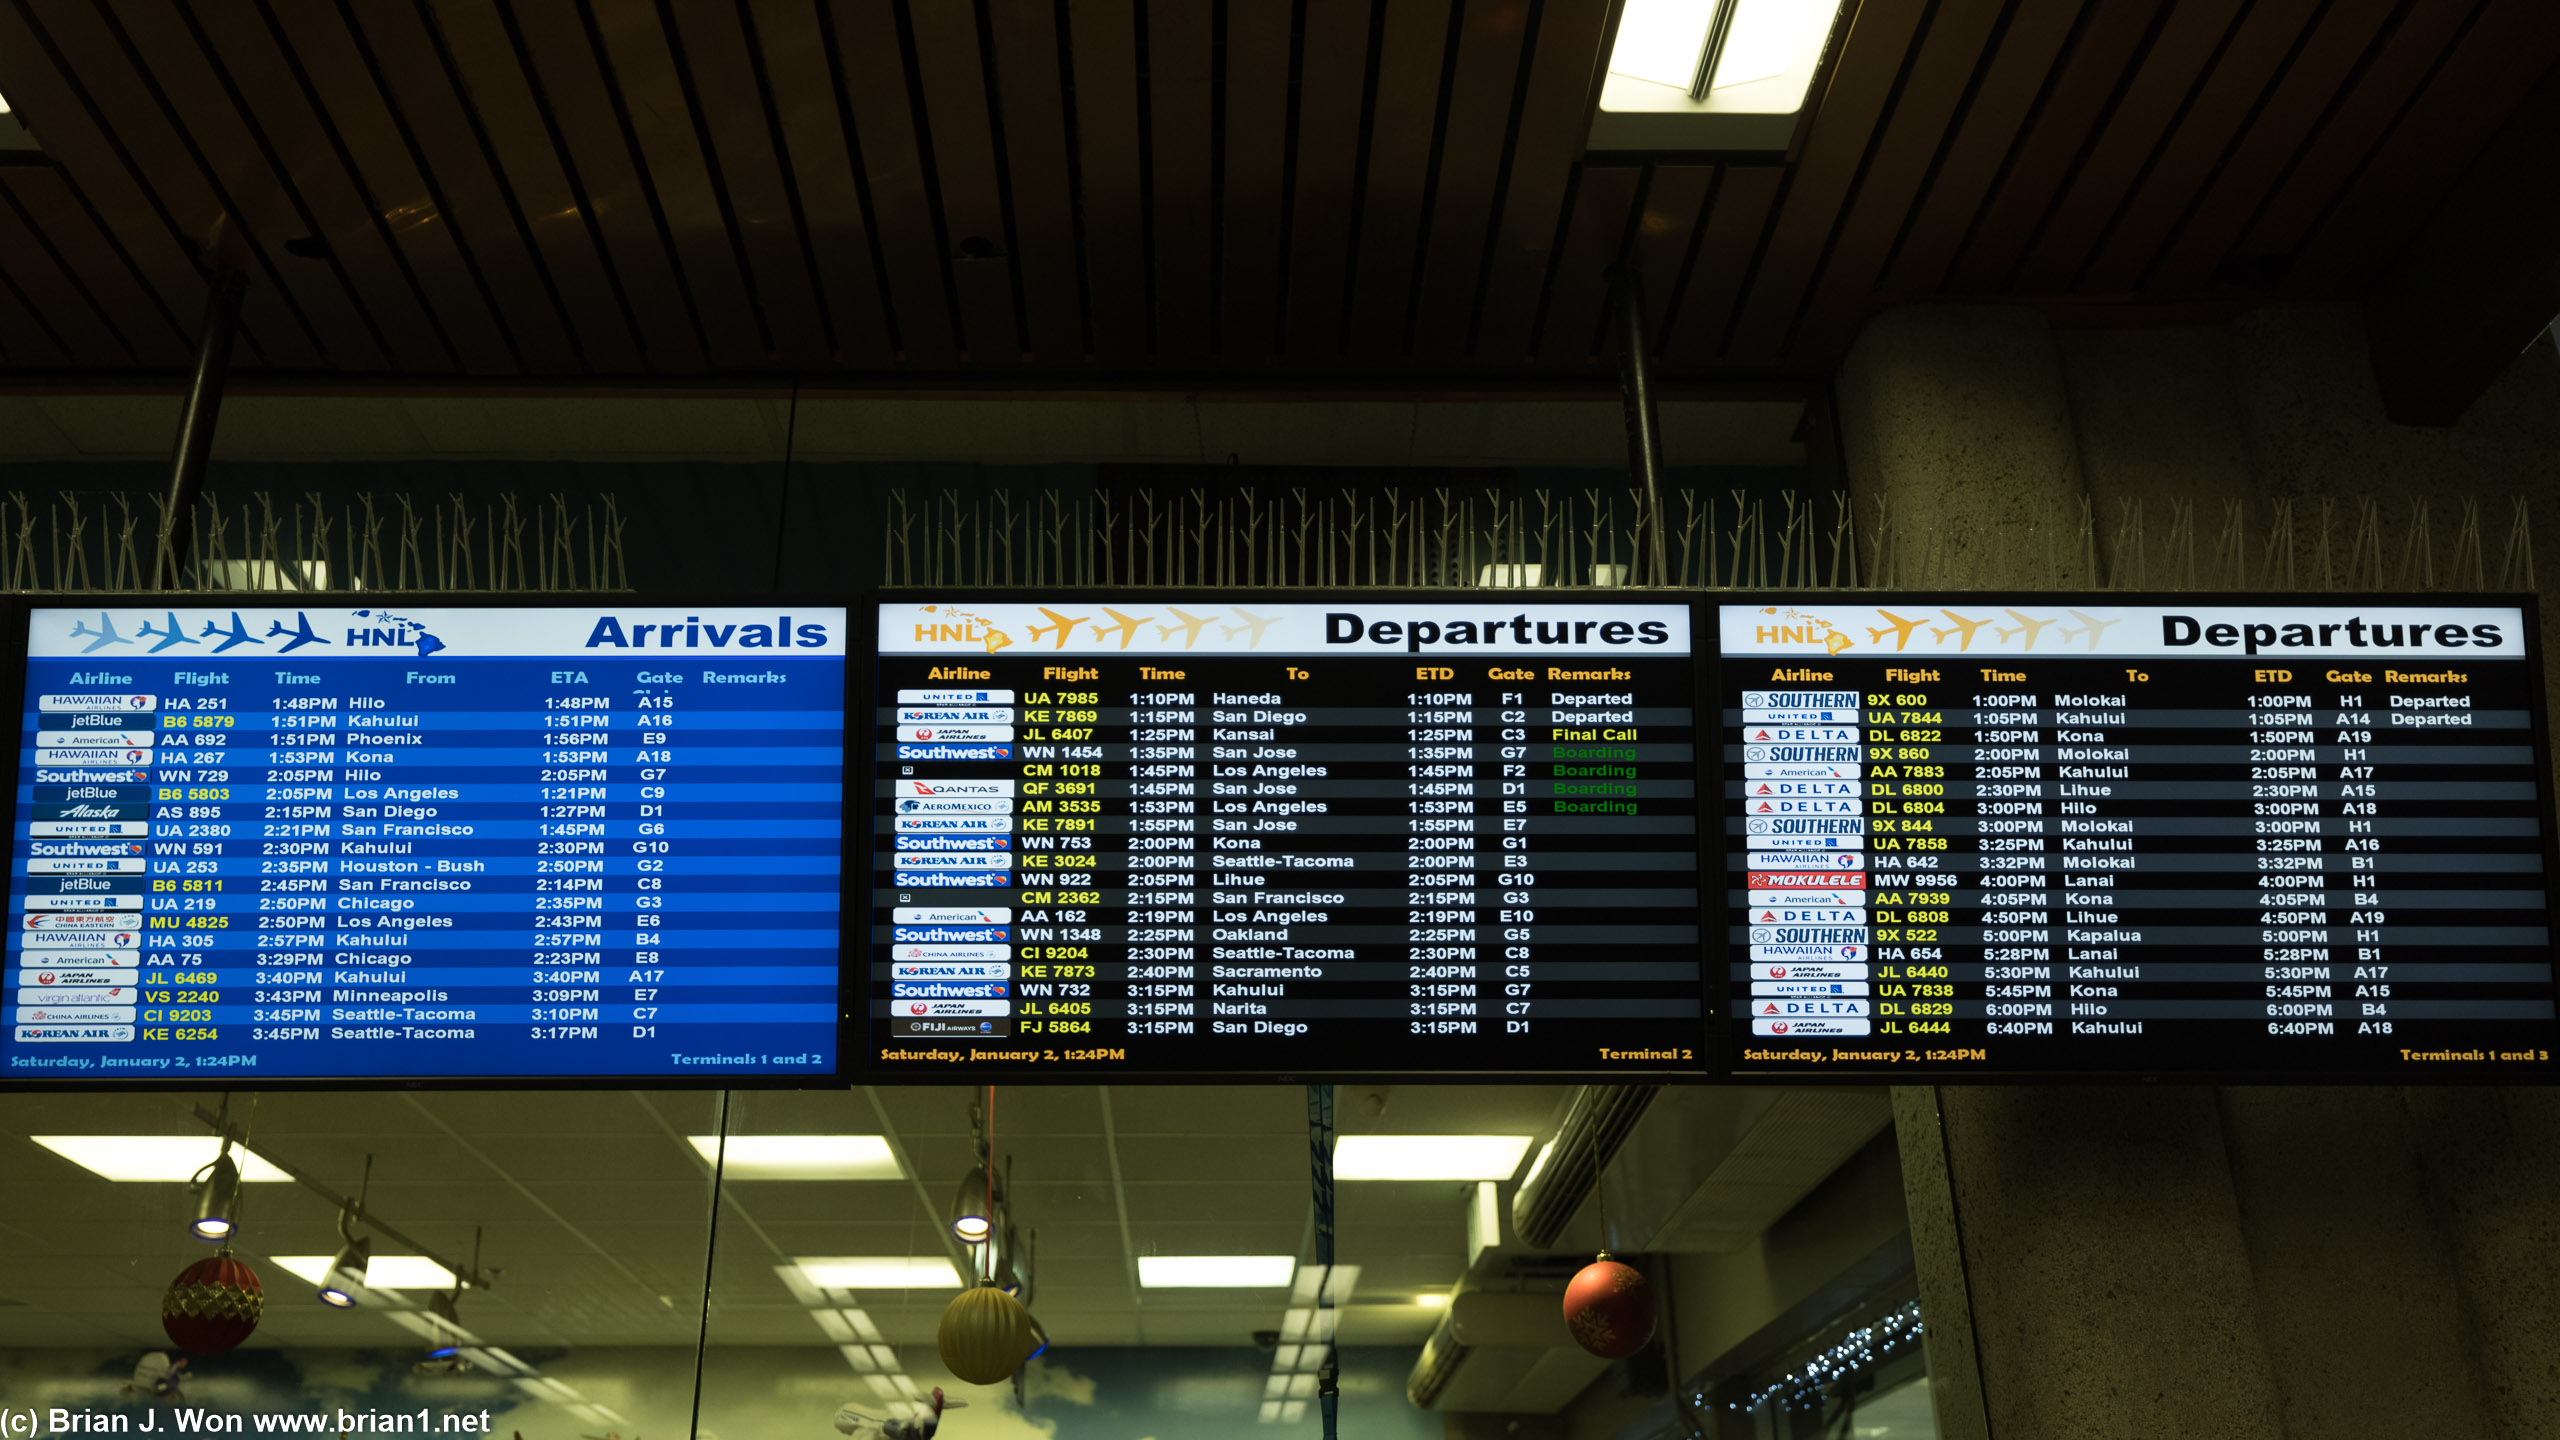 Arrivals and departures boards. Pretty busy.